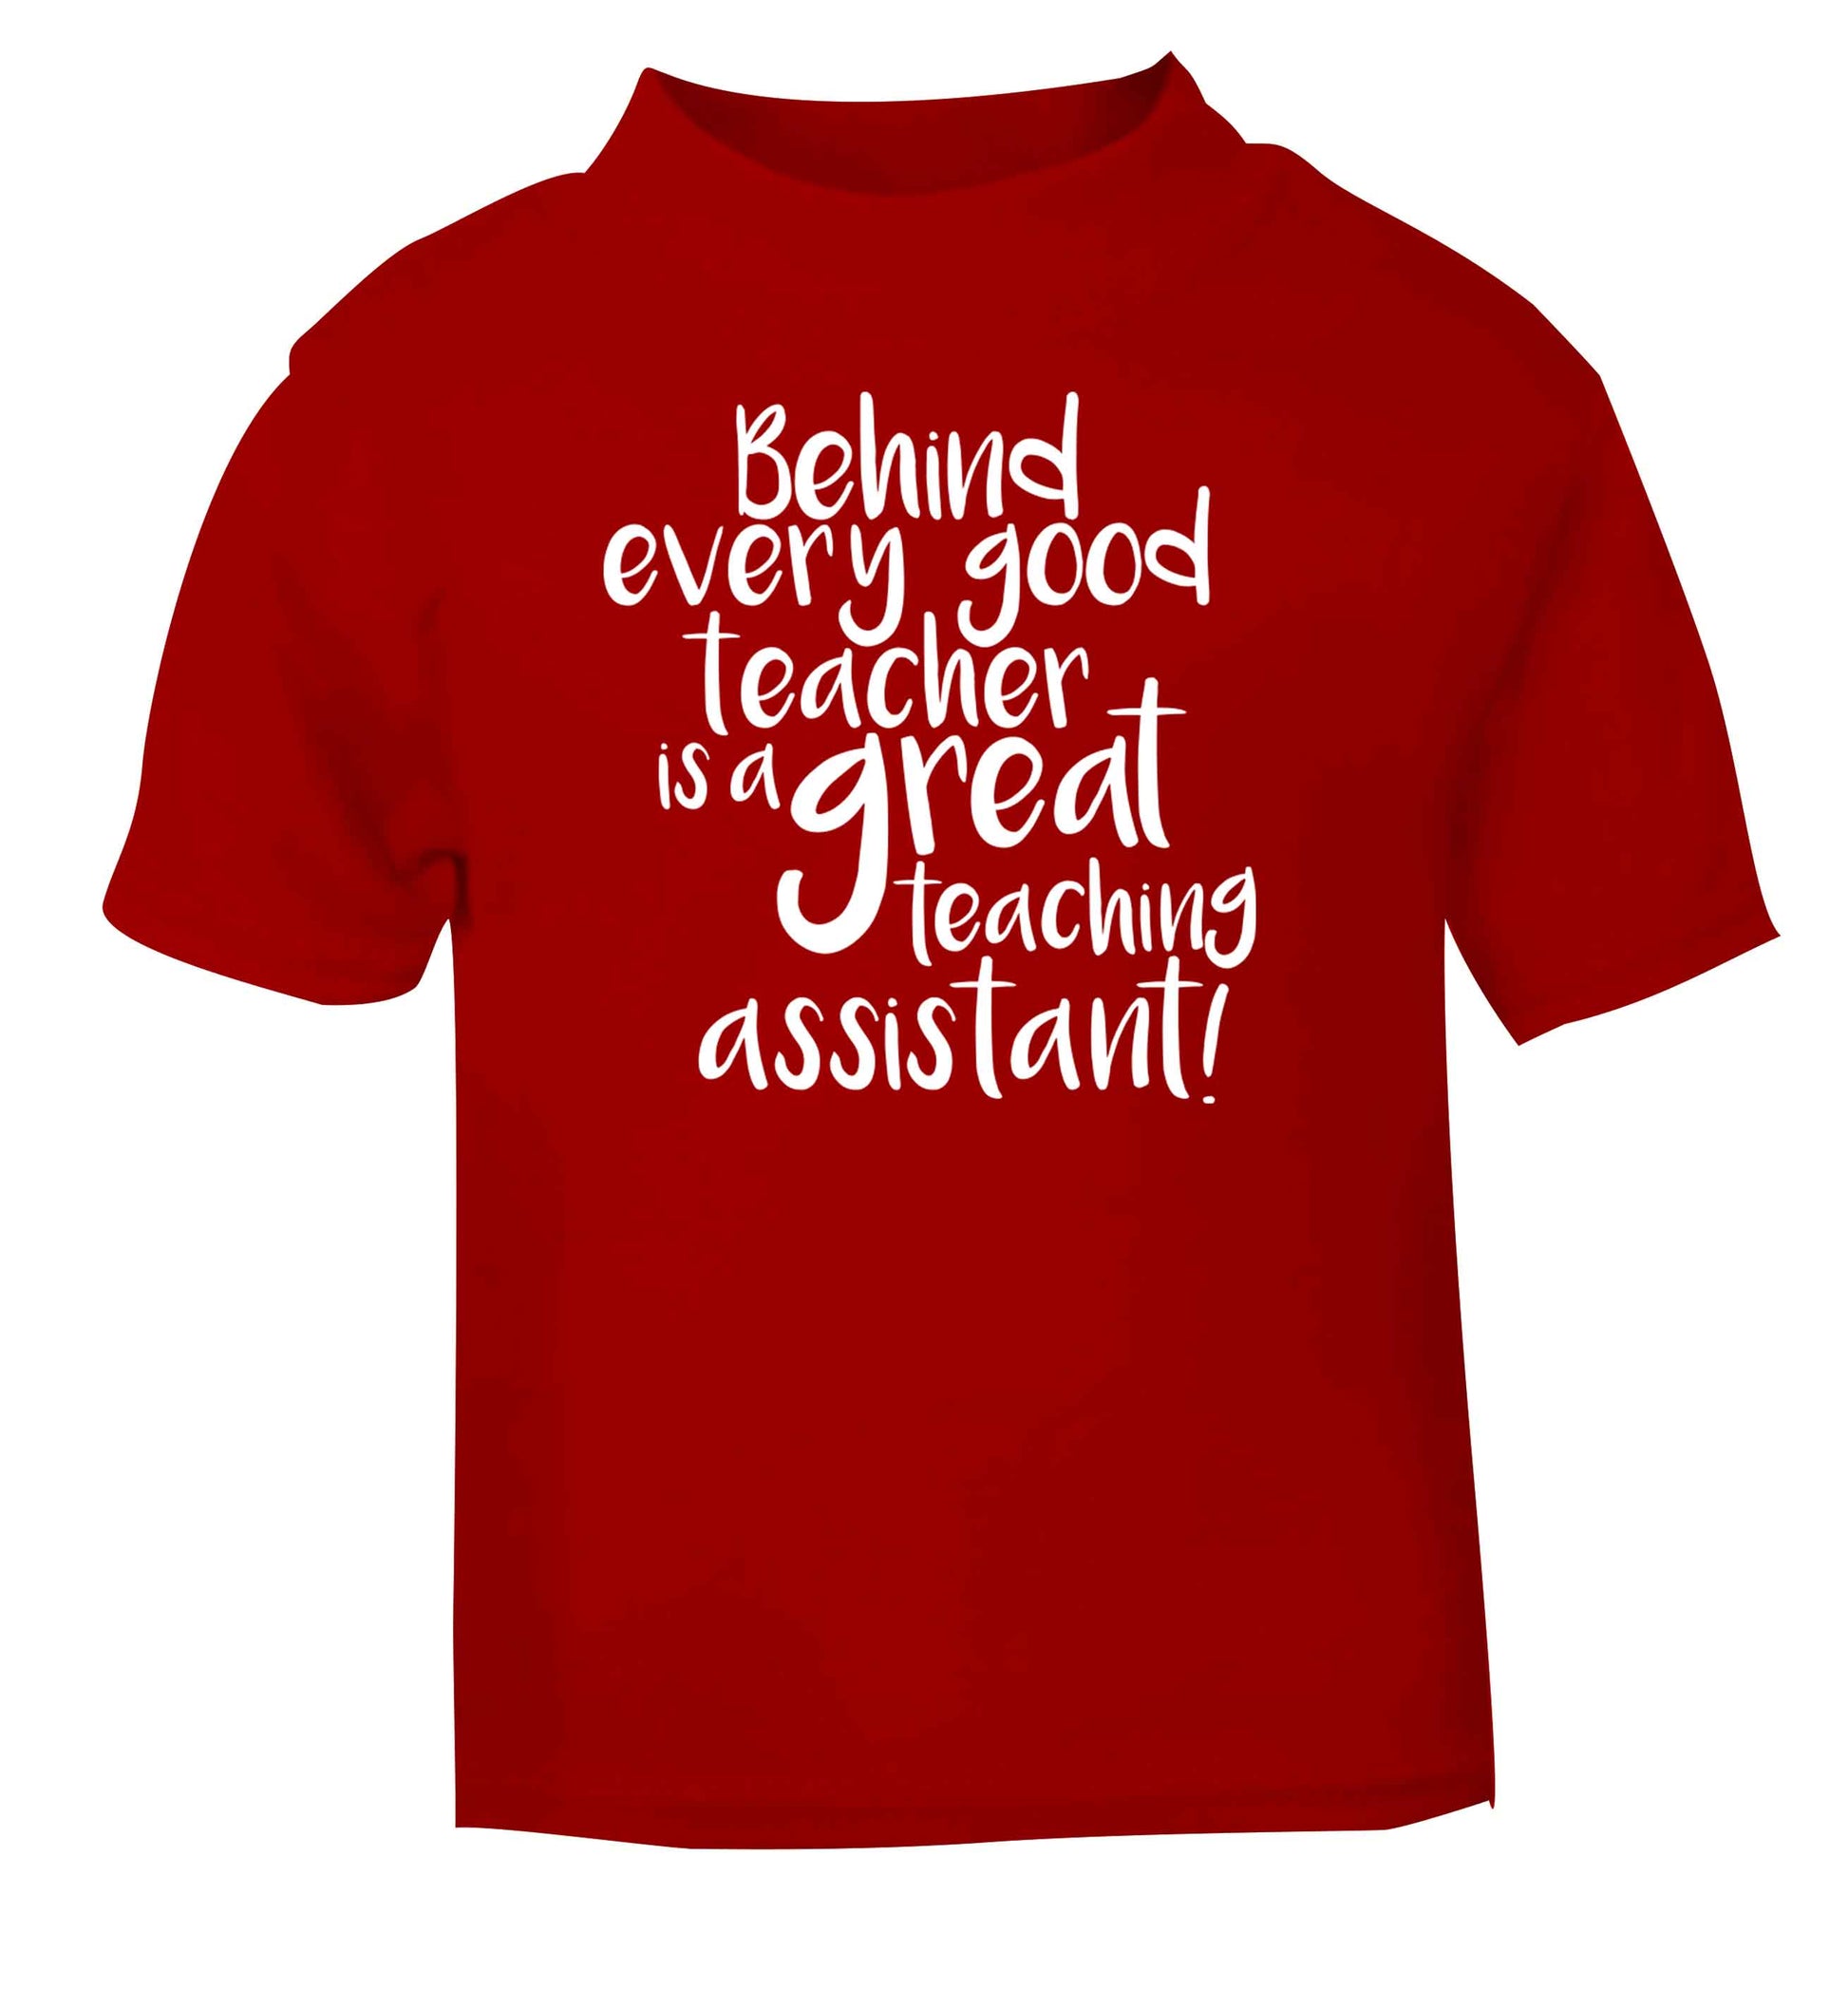 Behind every good teacher is a great teaching assistant red baby toddler Tshirt 2 Years